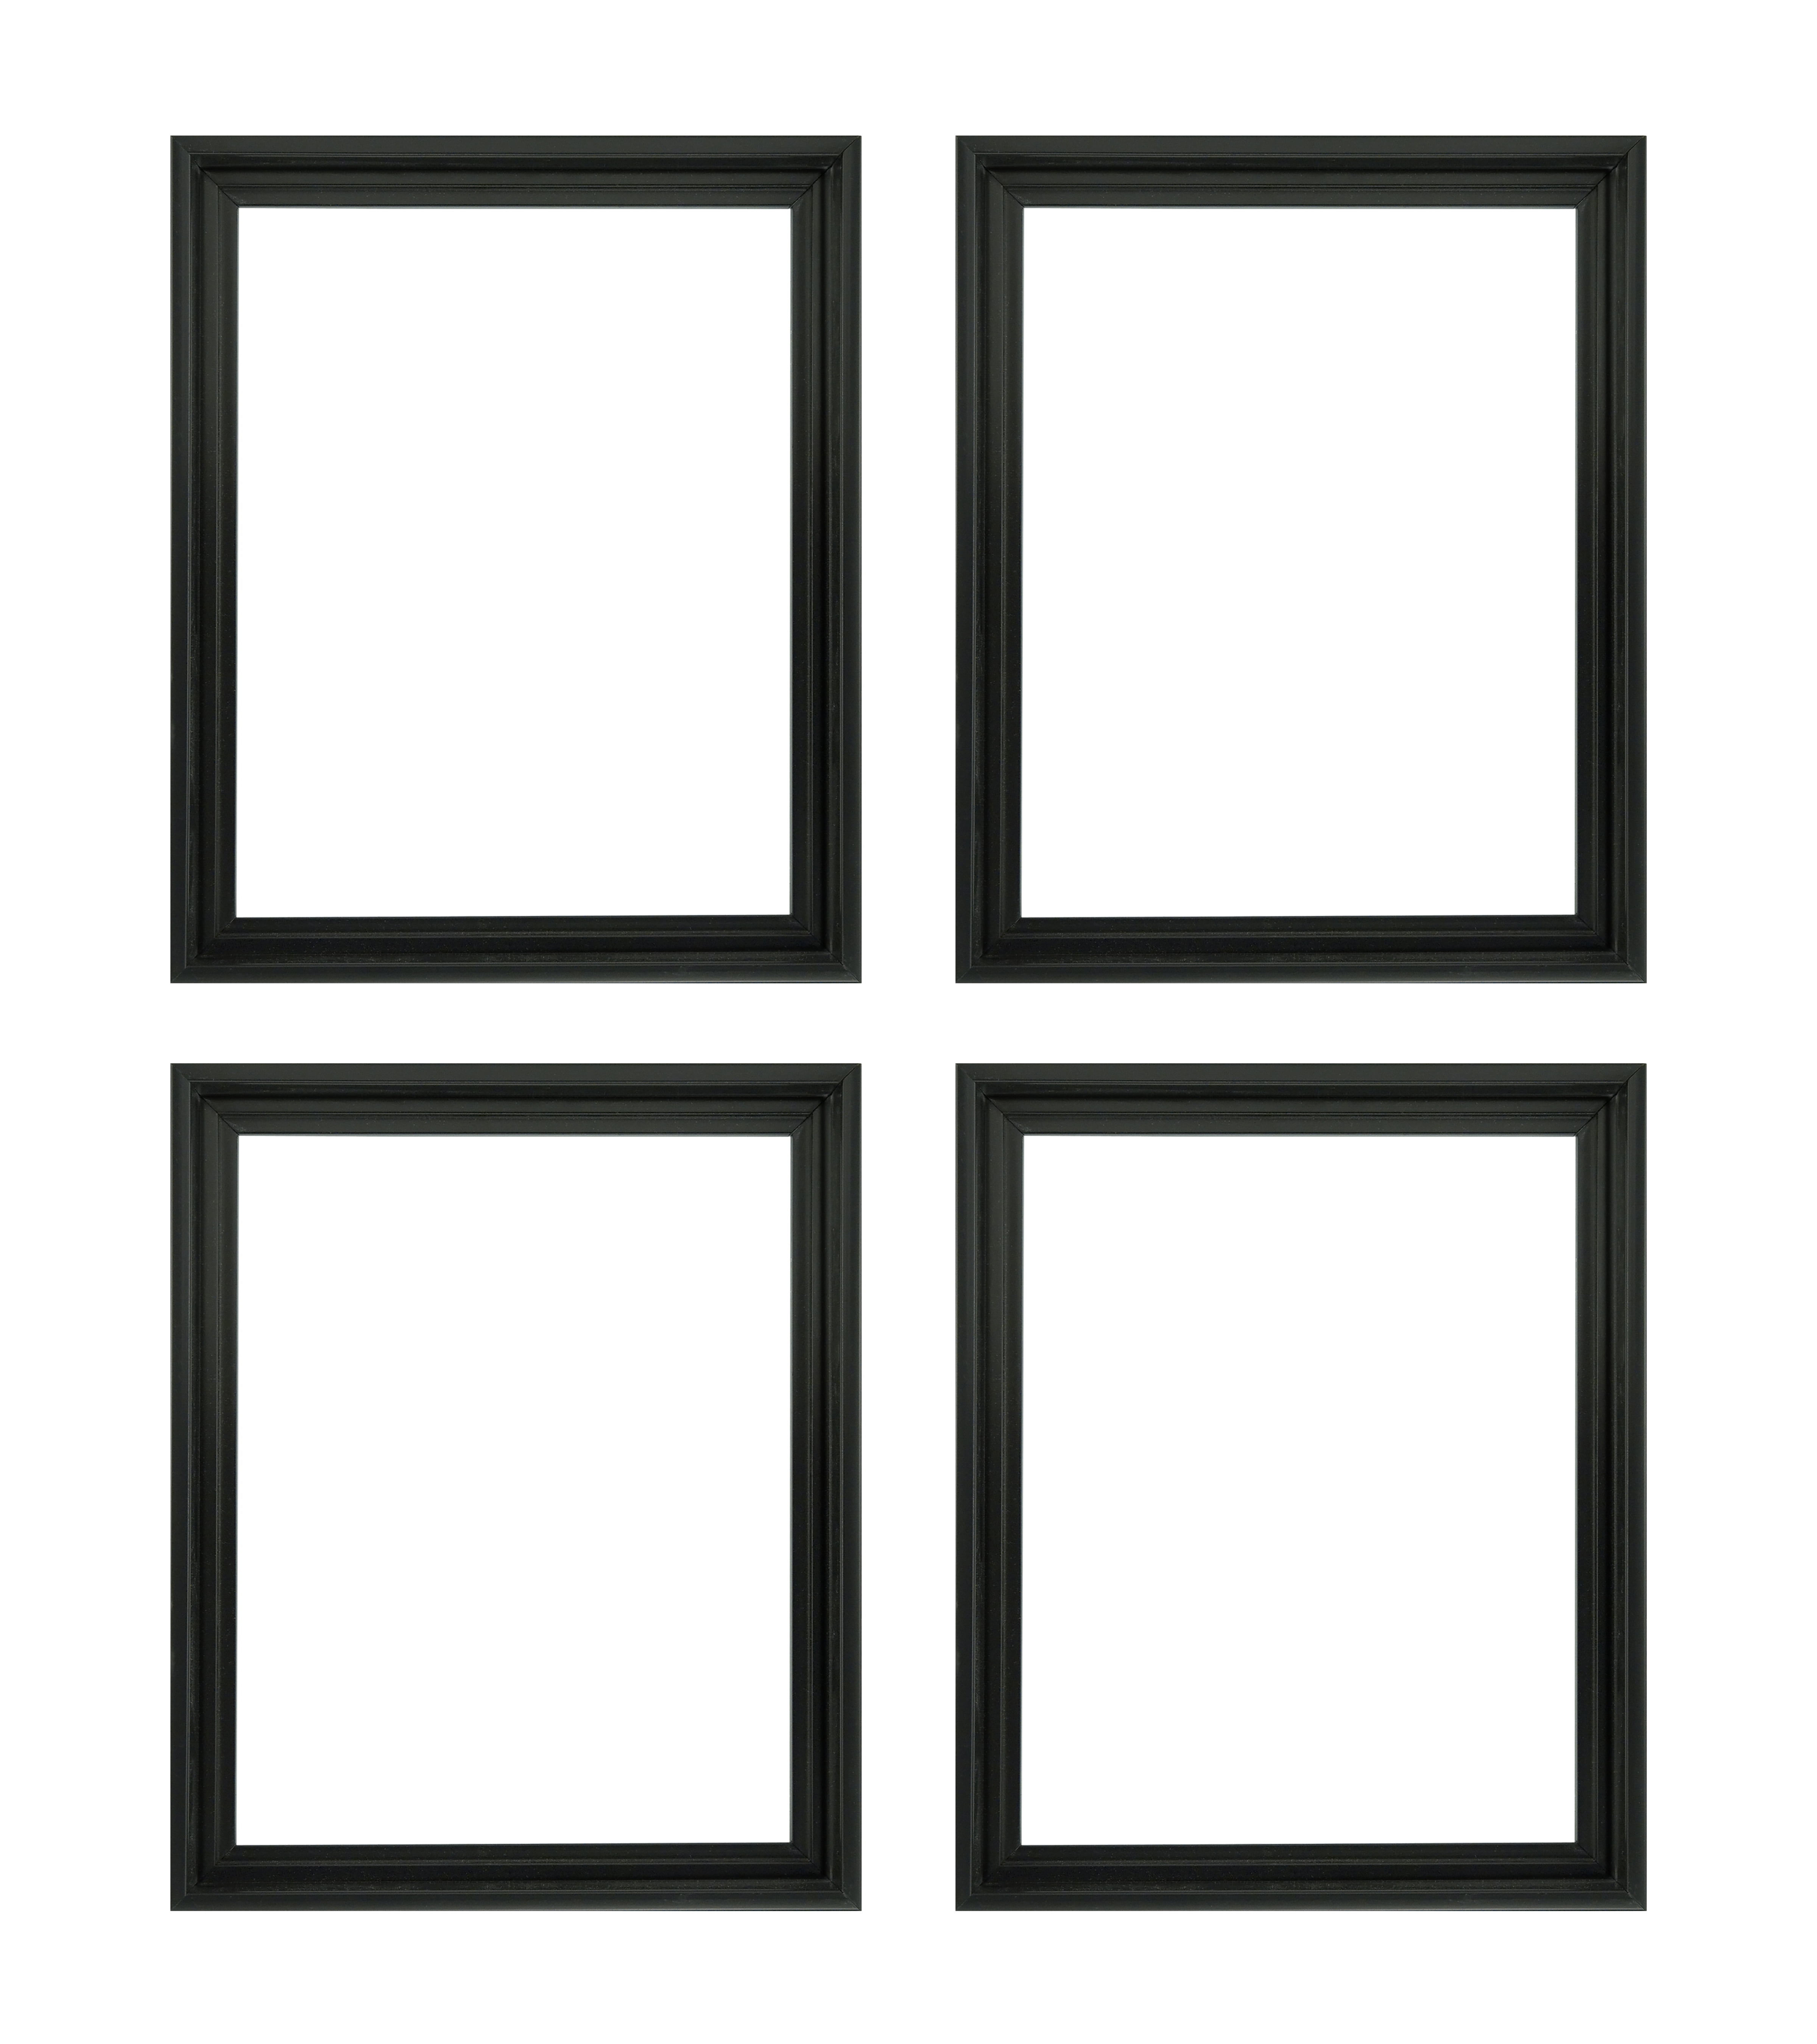 Creative Mark Illusions Floater Frames - 16x20 Black/Gold - 4 Pack of Deep Floating Frames for Stretched Canvas Paintings, Artwork, and More, Size: 16